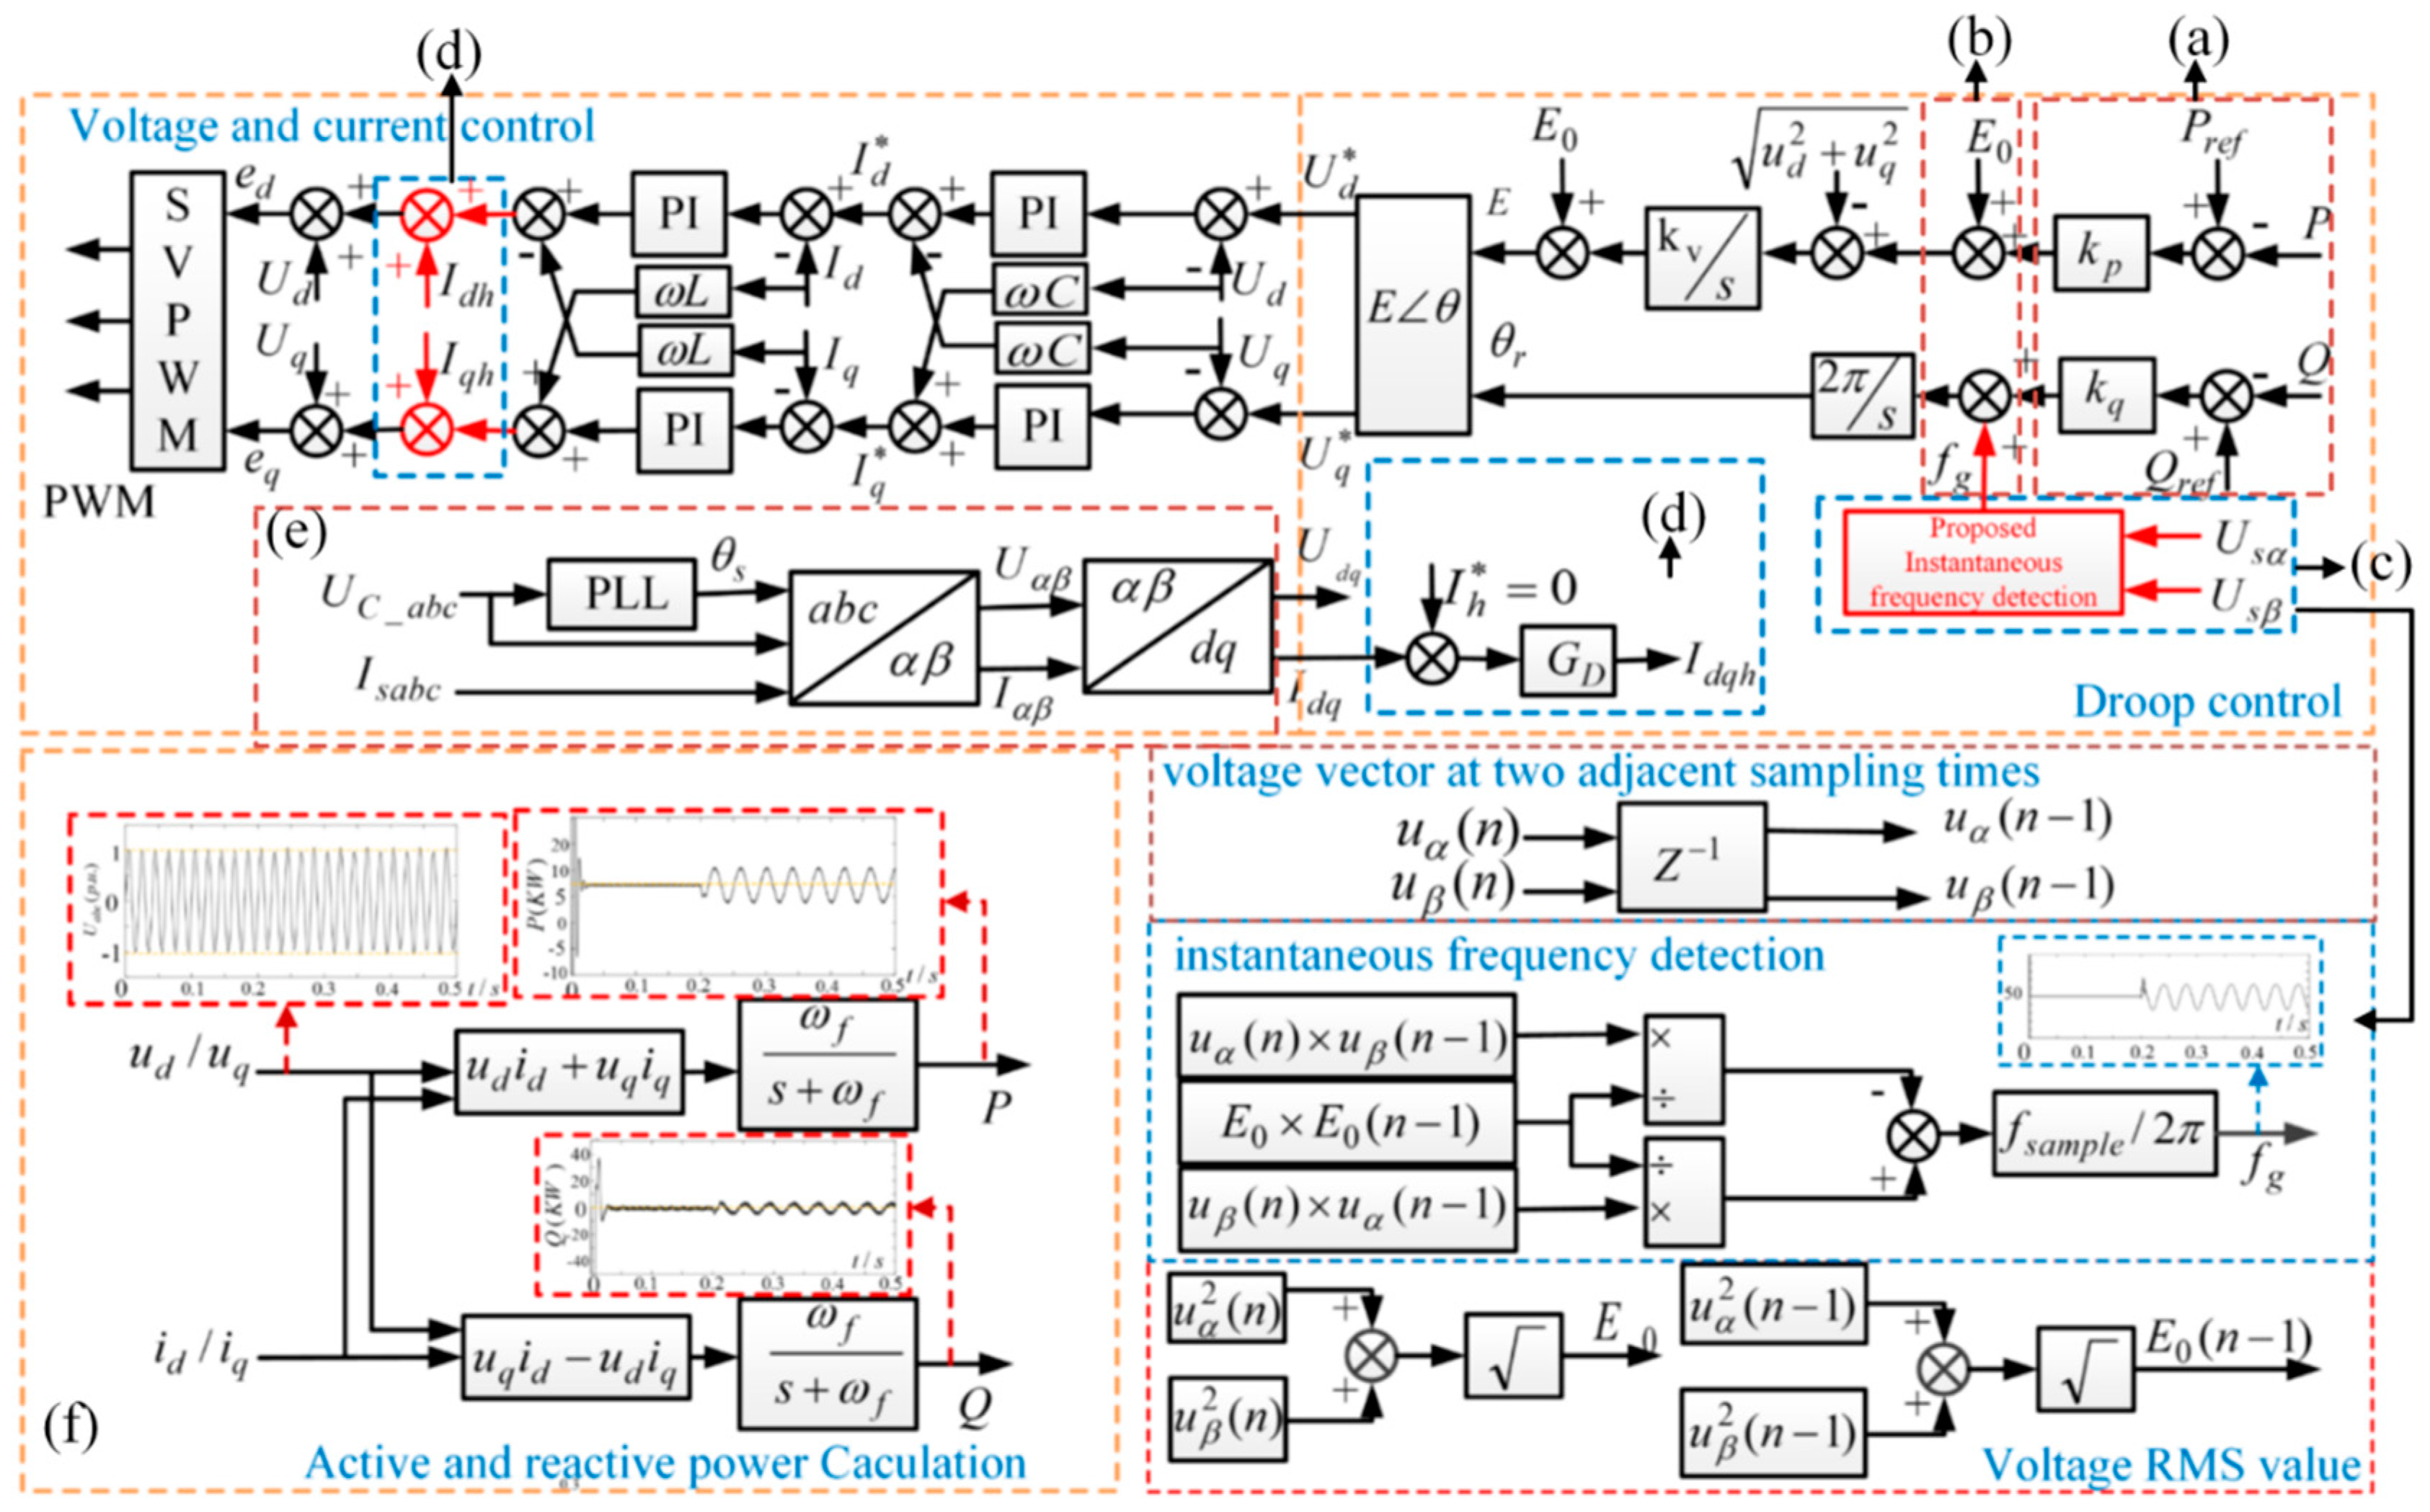 Electronics | Free Full-Text | An Improved Droop Control Strategy for  Grid-Connected Inverter Applied in Grid Voltage Inter-Harmonics and  Fundamental Frequency Fluctuation | HTML